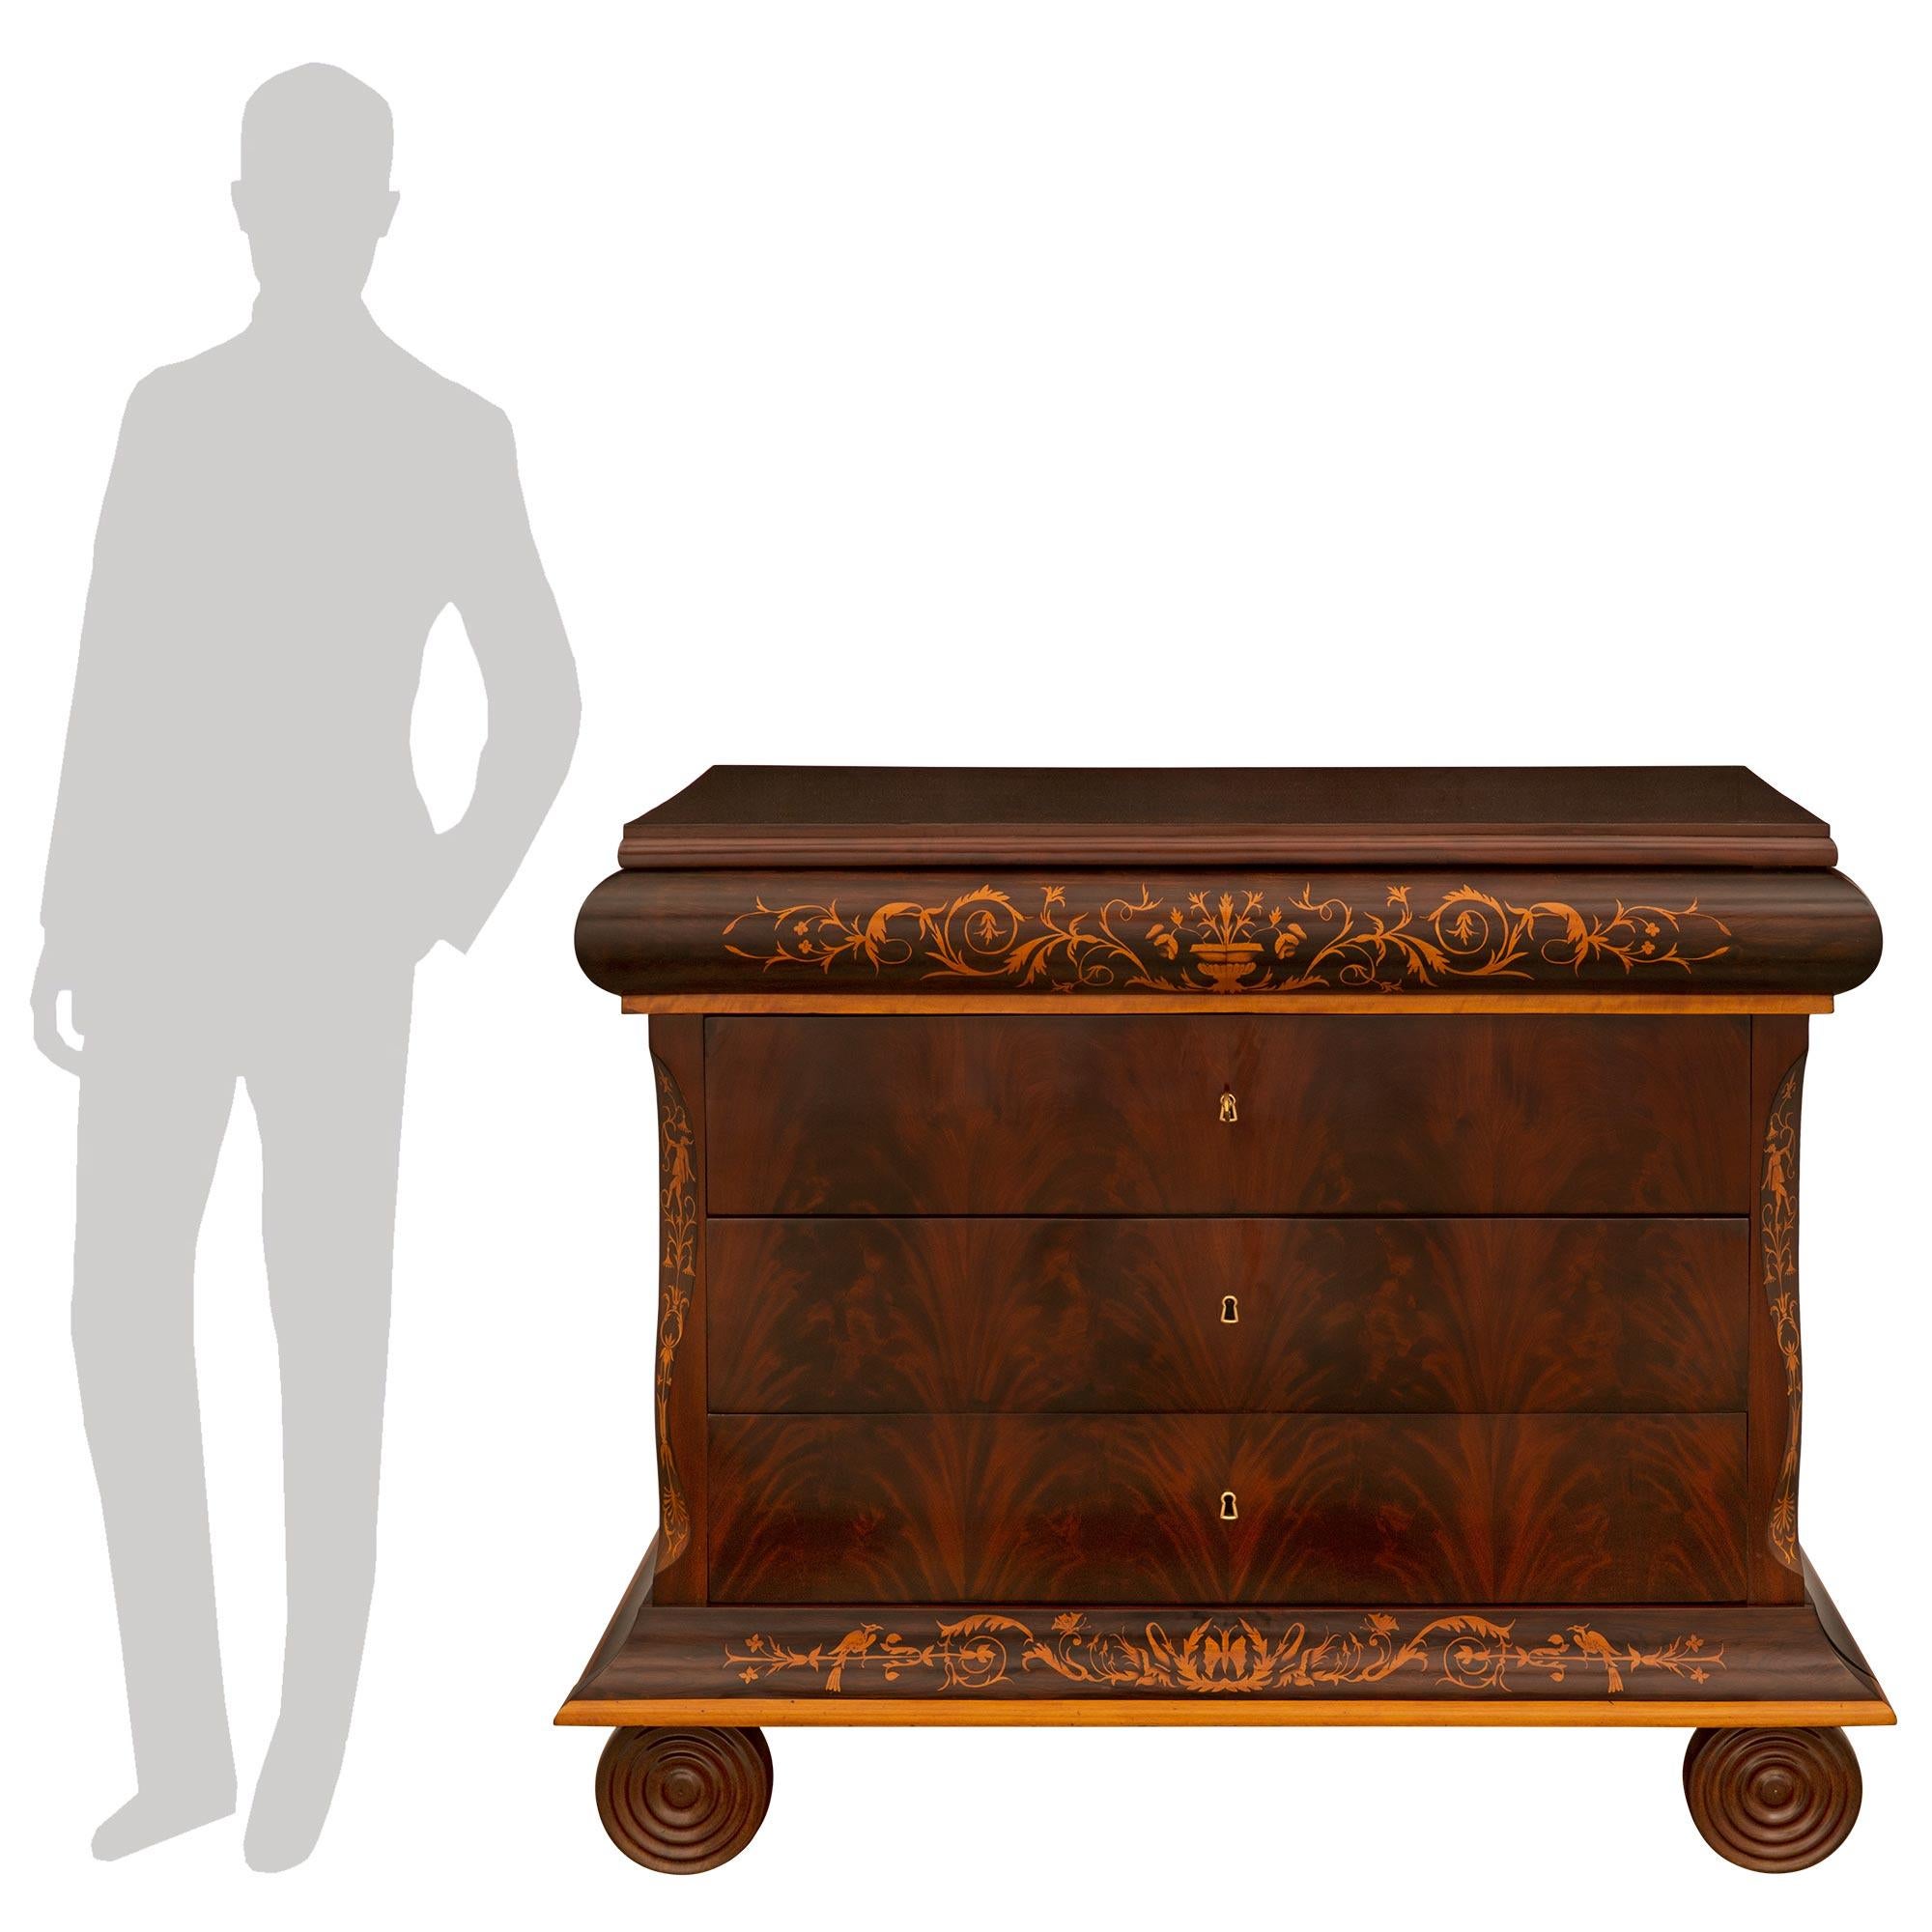 A stunning pair of Italian 19th century Charles X period Mahogany and Maplewood inlaid commodes. Each five drawer commode is raised on unique circular reeded front legs below the bottom concave shaped drawer with a maple bull nose band and inlayed